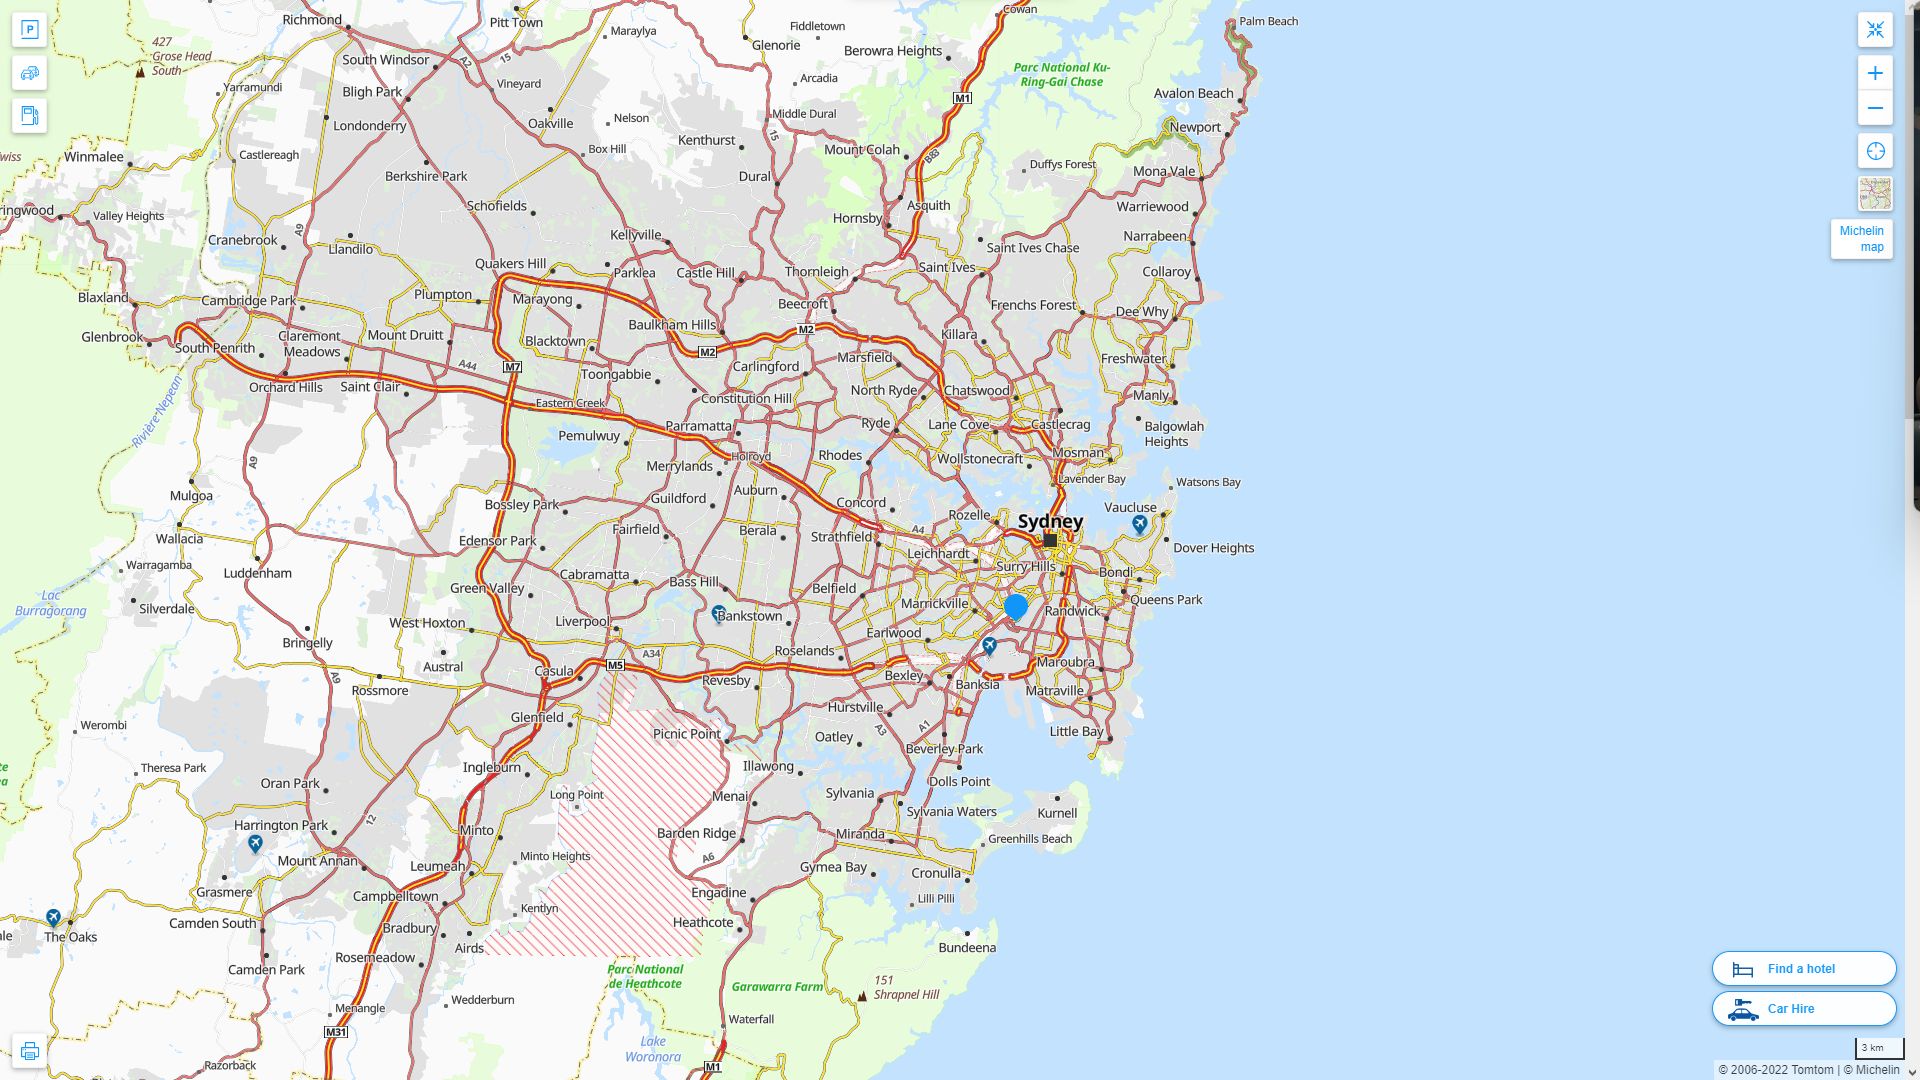 Sydney Highway and Road Map